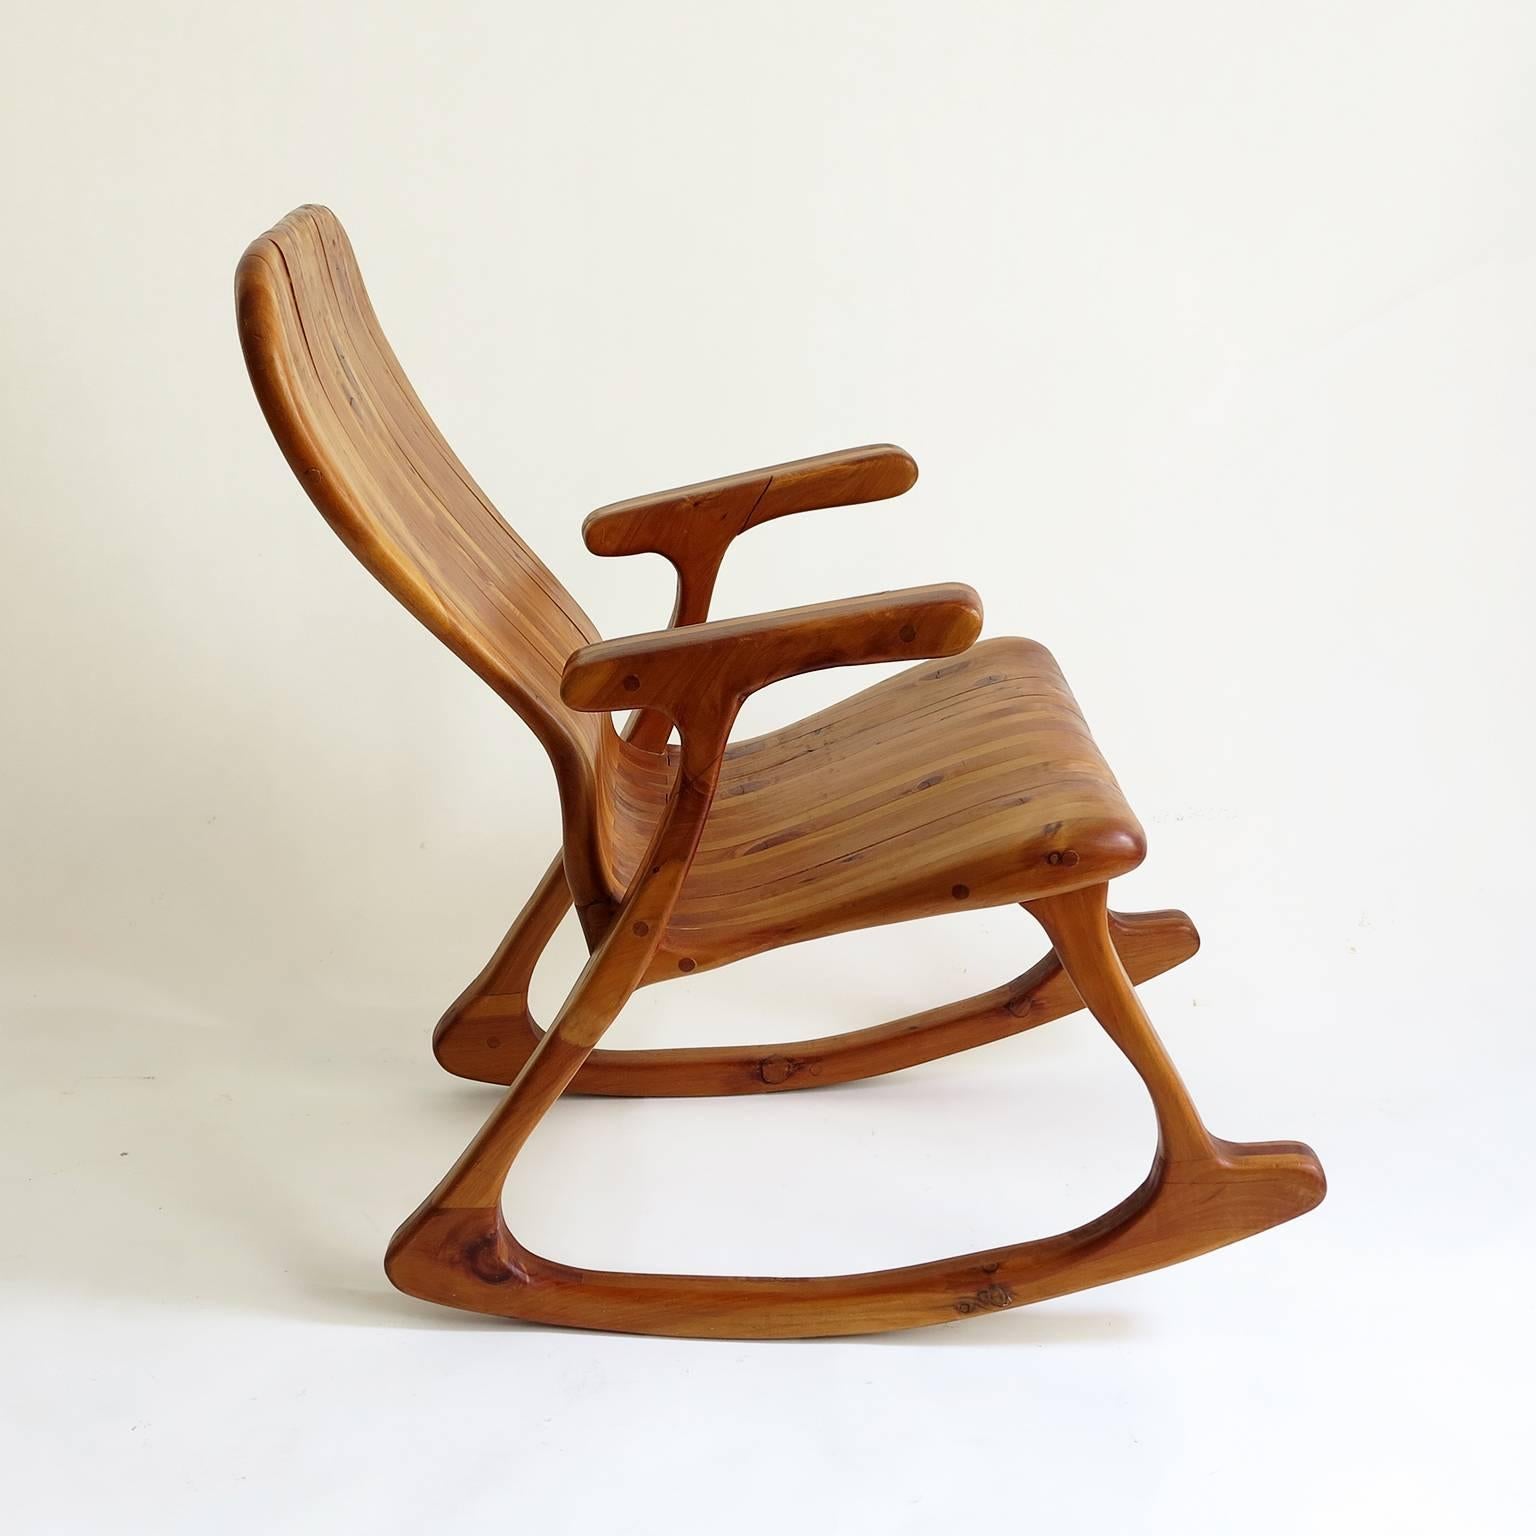 Ergonomics and robust rocking chair designed and manufactured by Victor Klassen in 1970.